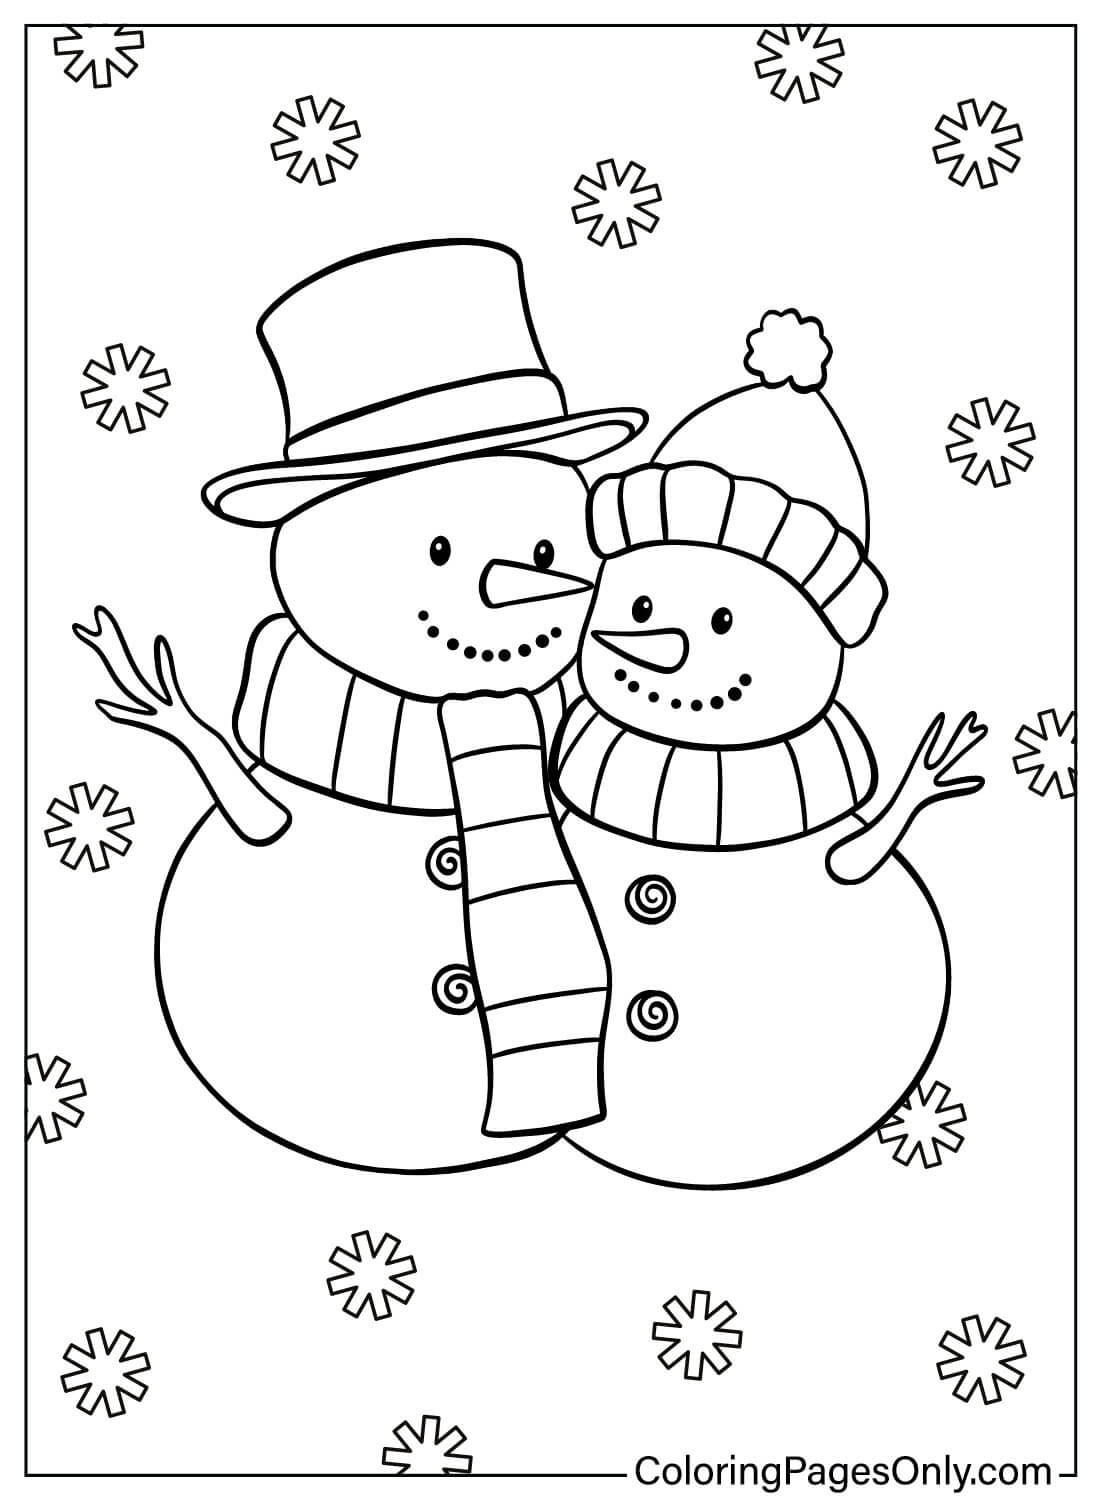 Snowman Coloring Page To Print